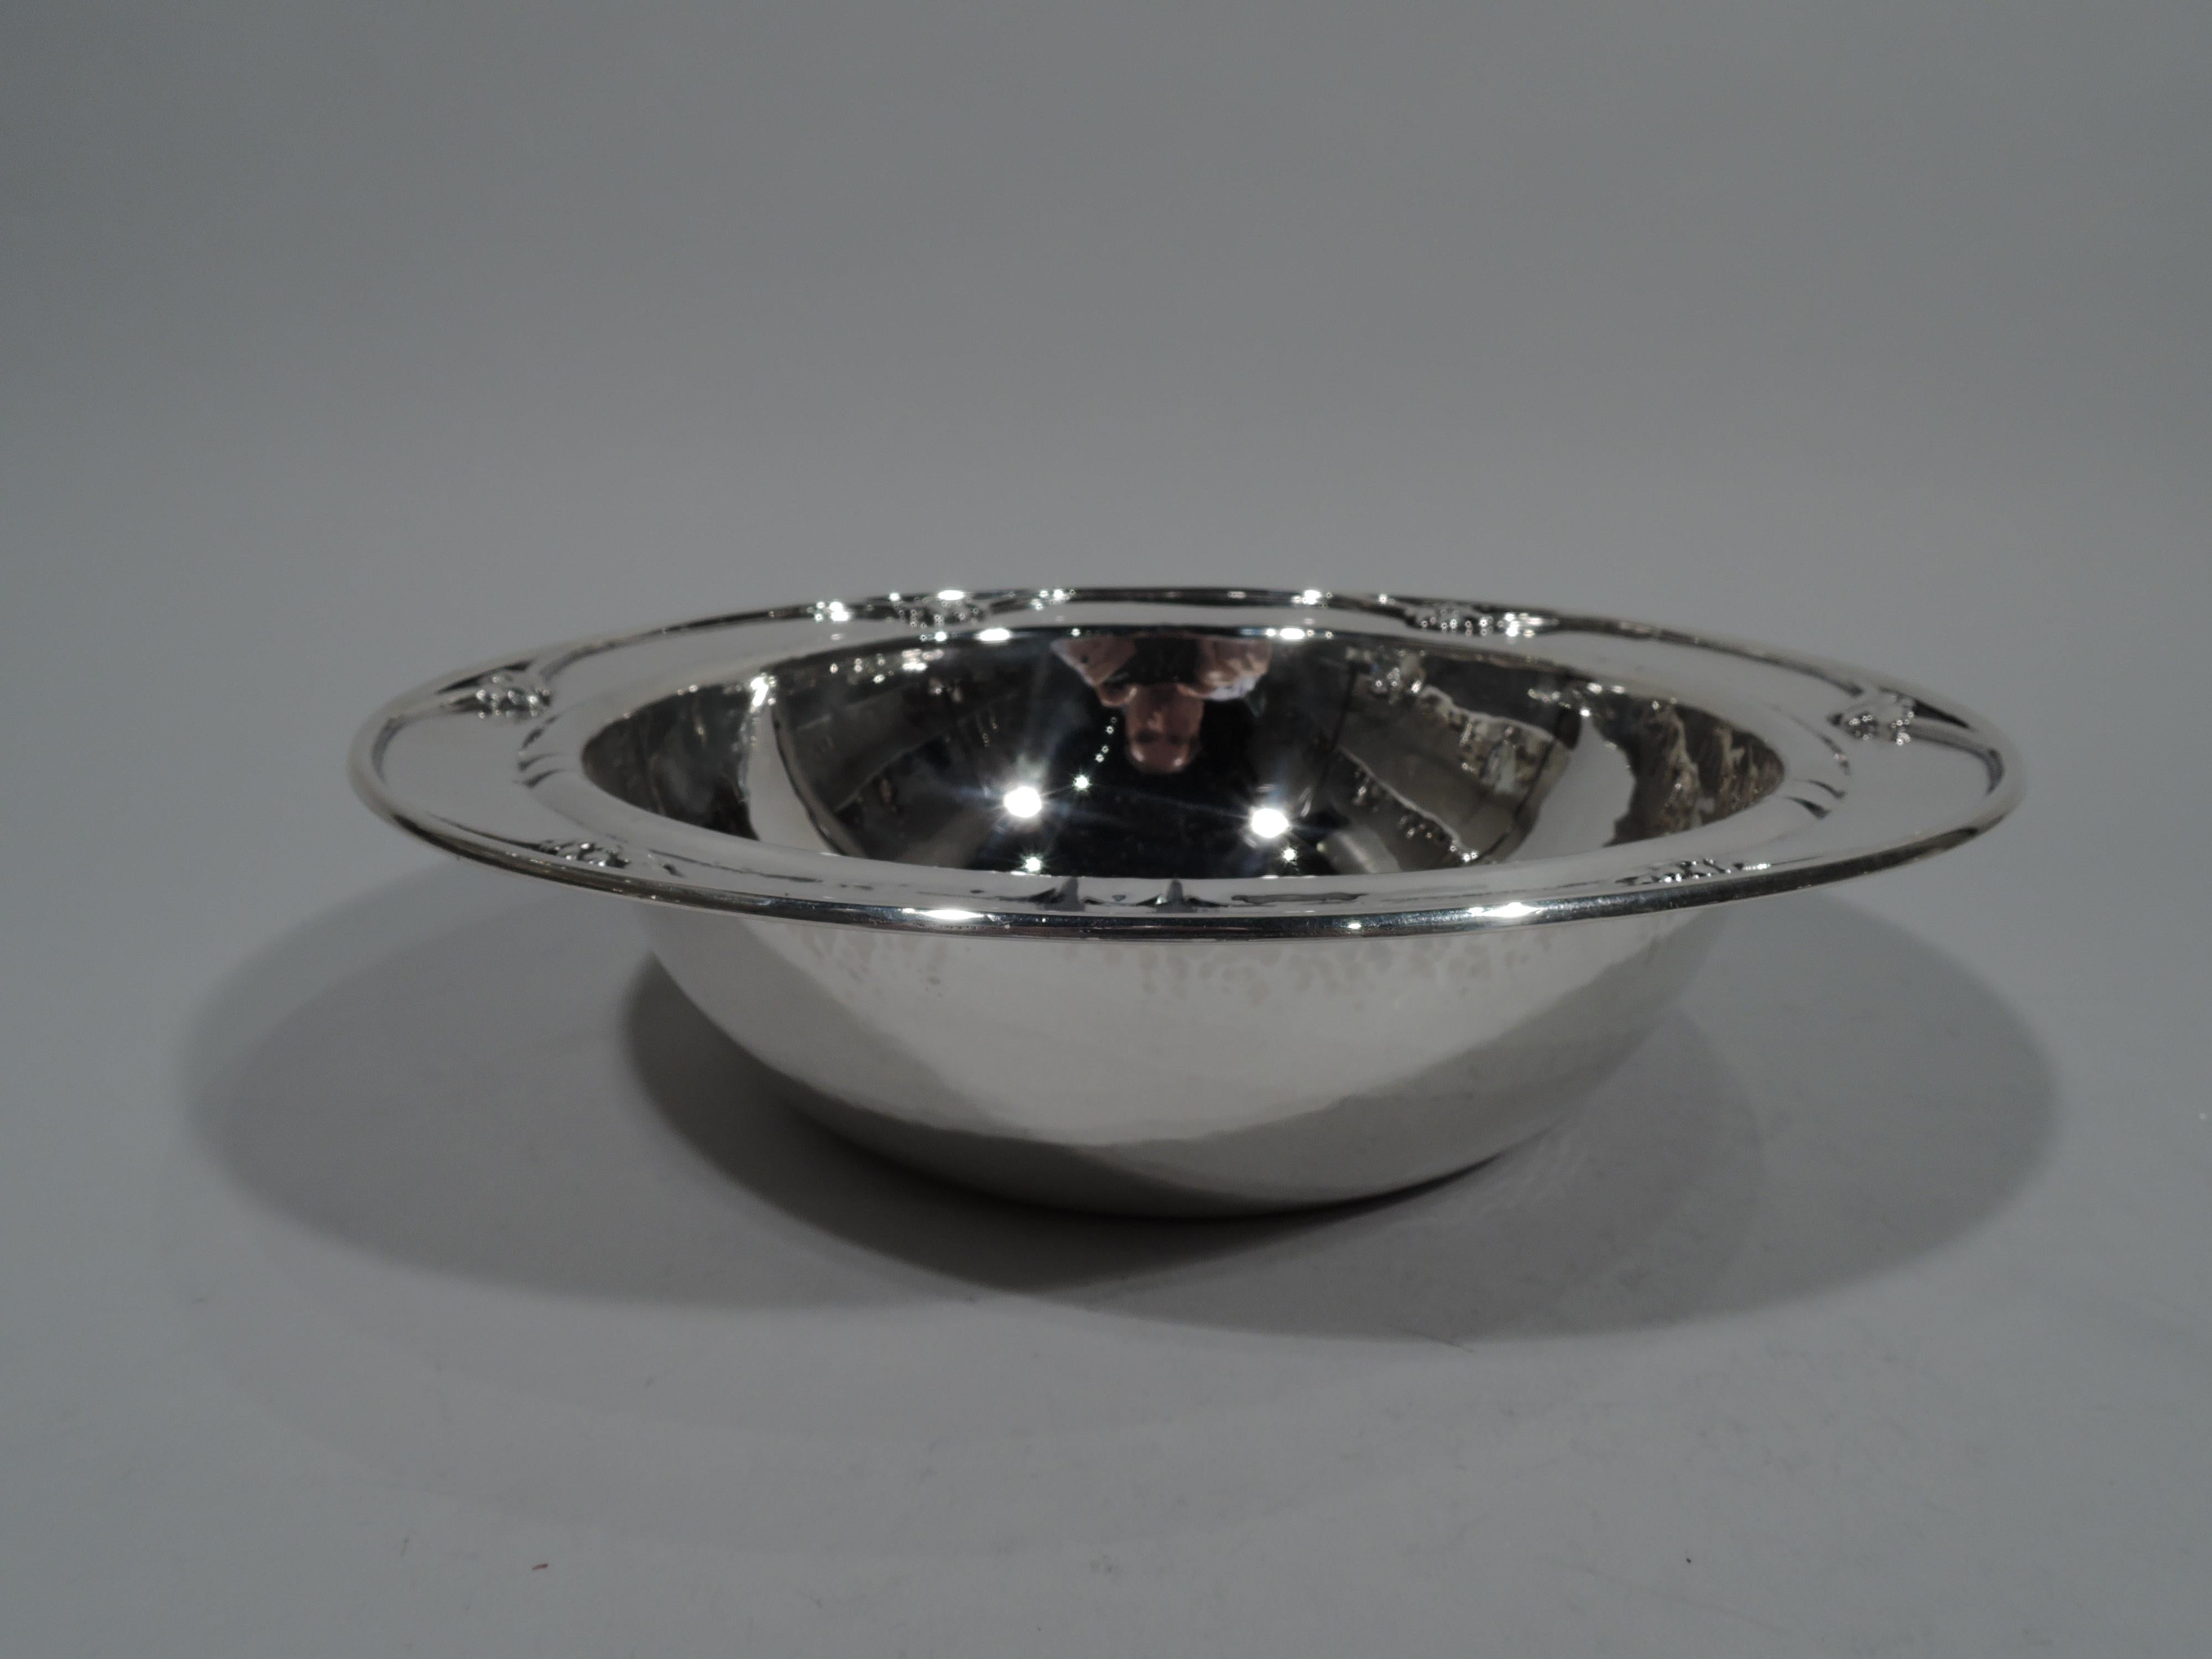 Art Deco sterling silver bowl. Made by Georg Jensen in Copenhagen. Round with curved sides and flat rim. Applied berry bunches and incised notches. Visible hand hammering with nice shimmer. Fully marked with 2 early maker’s stamps from 1915-30 and